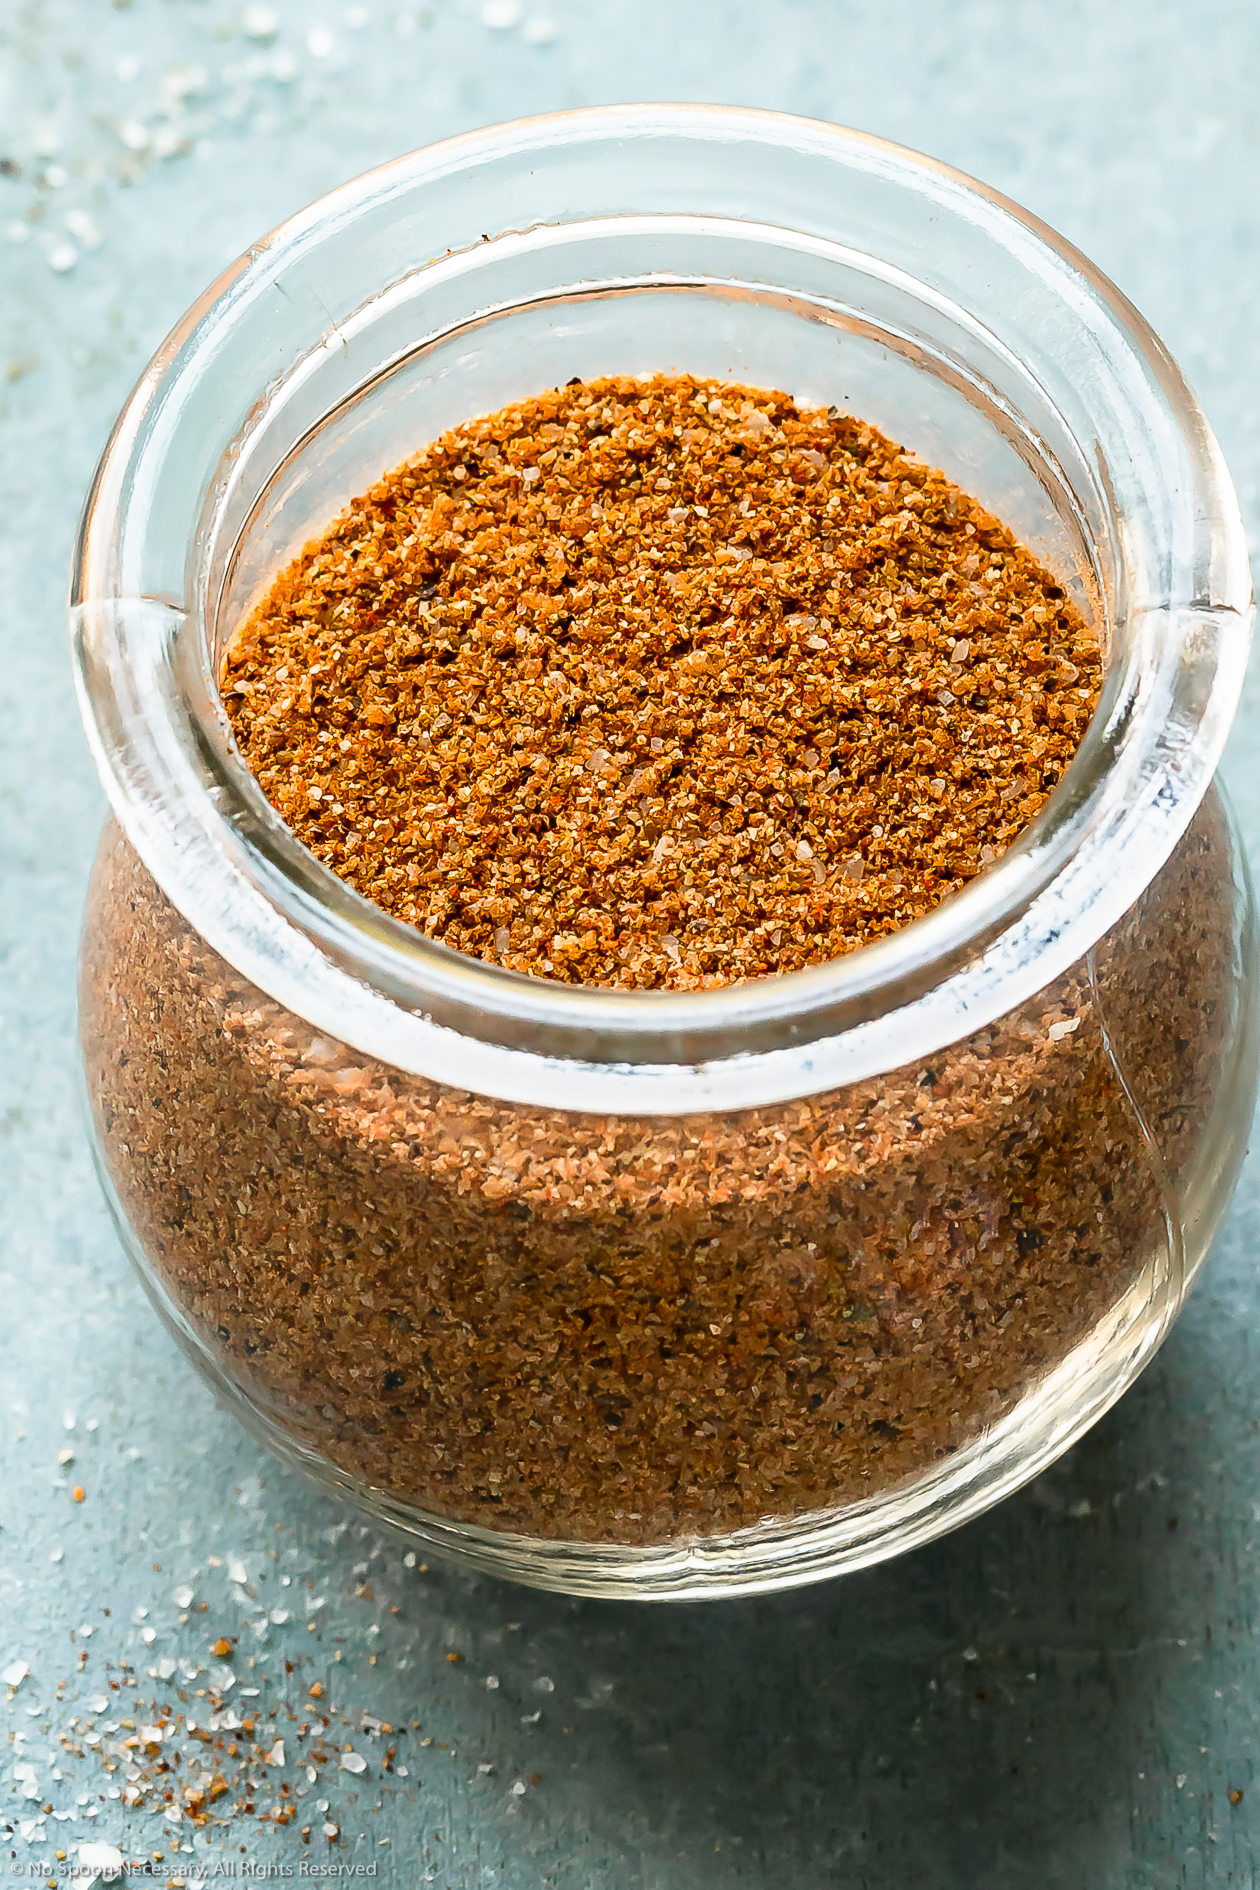 3 Seasonings For Chicken and Steak - Essential Homemade Spice Rubs